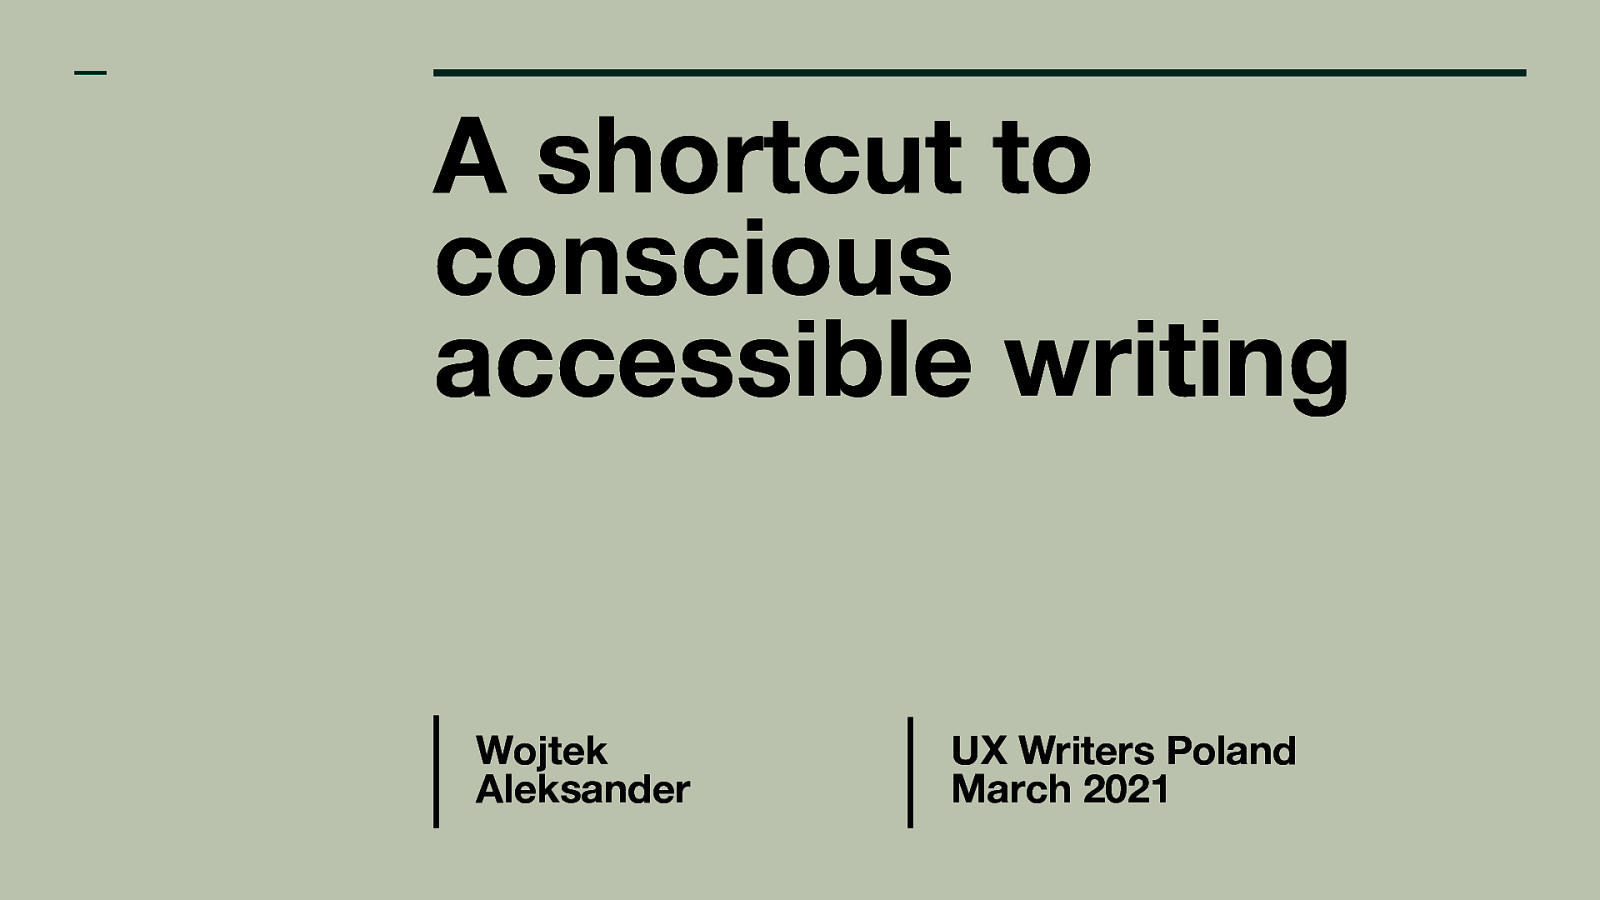 A shortcut to conscious accessible writing